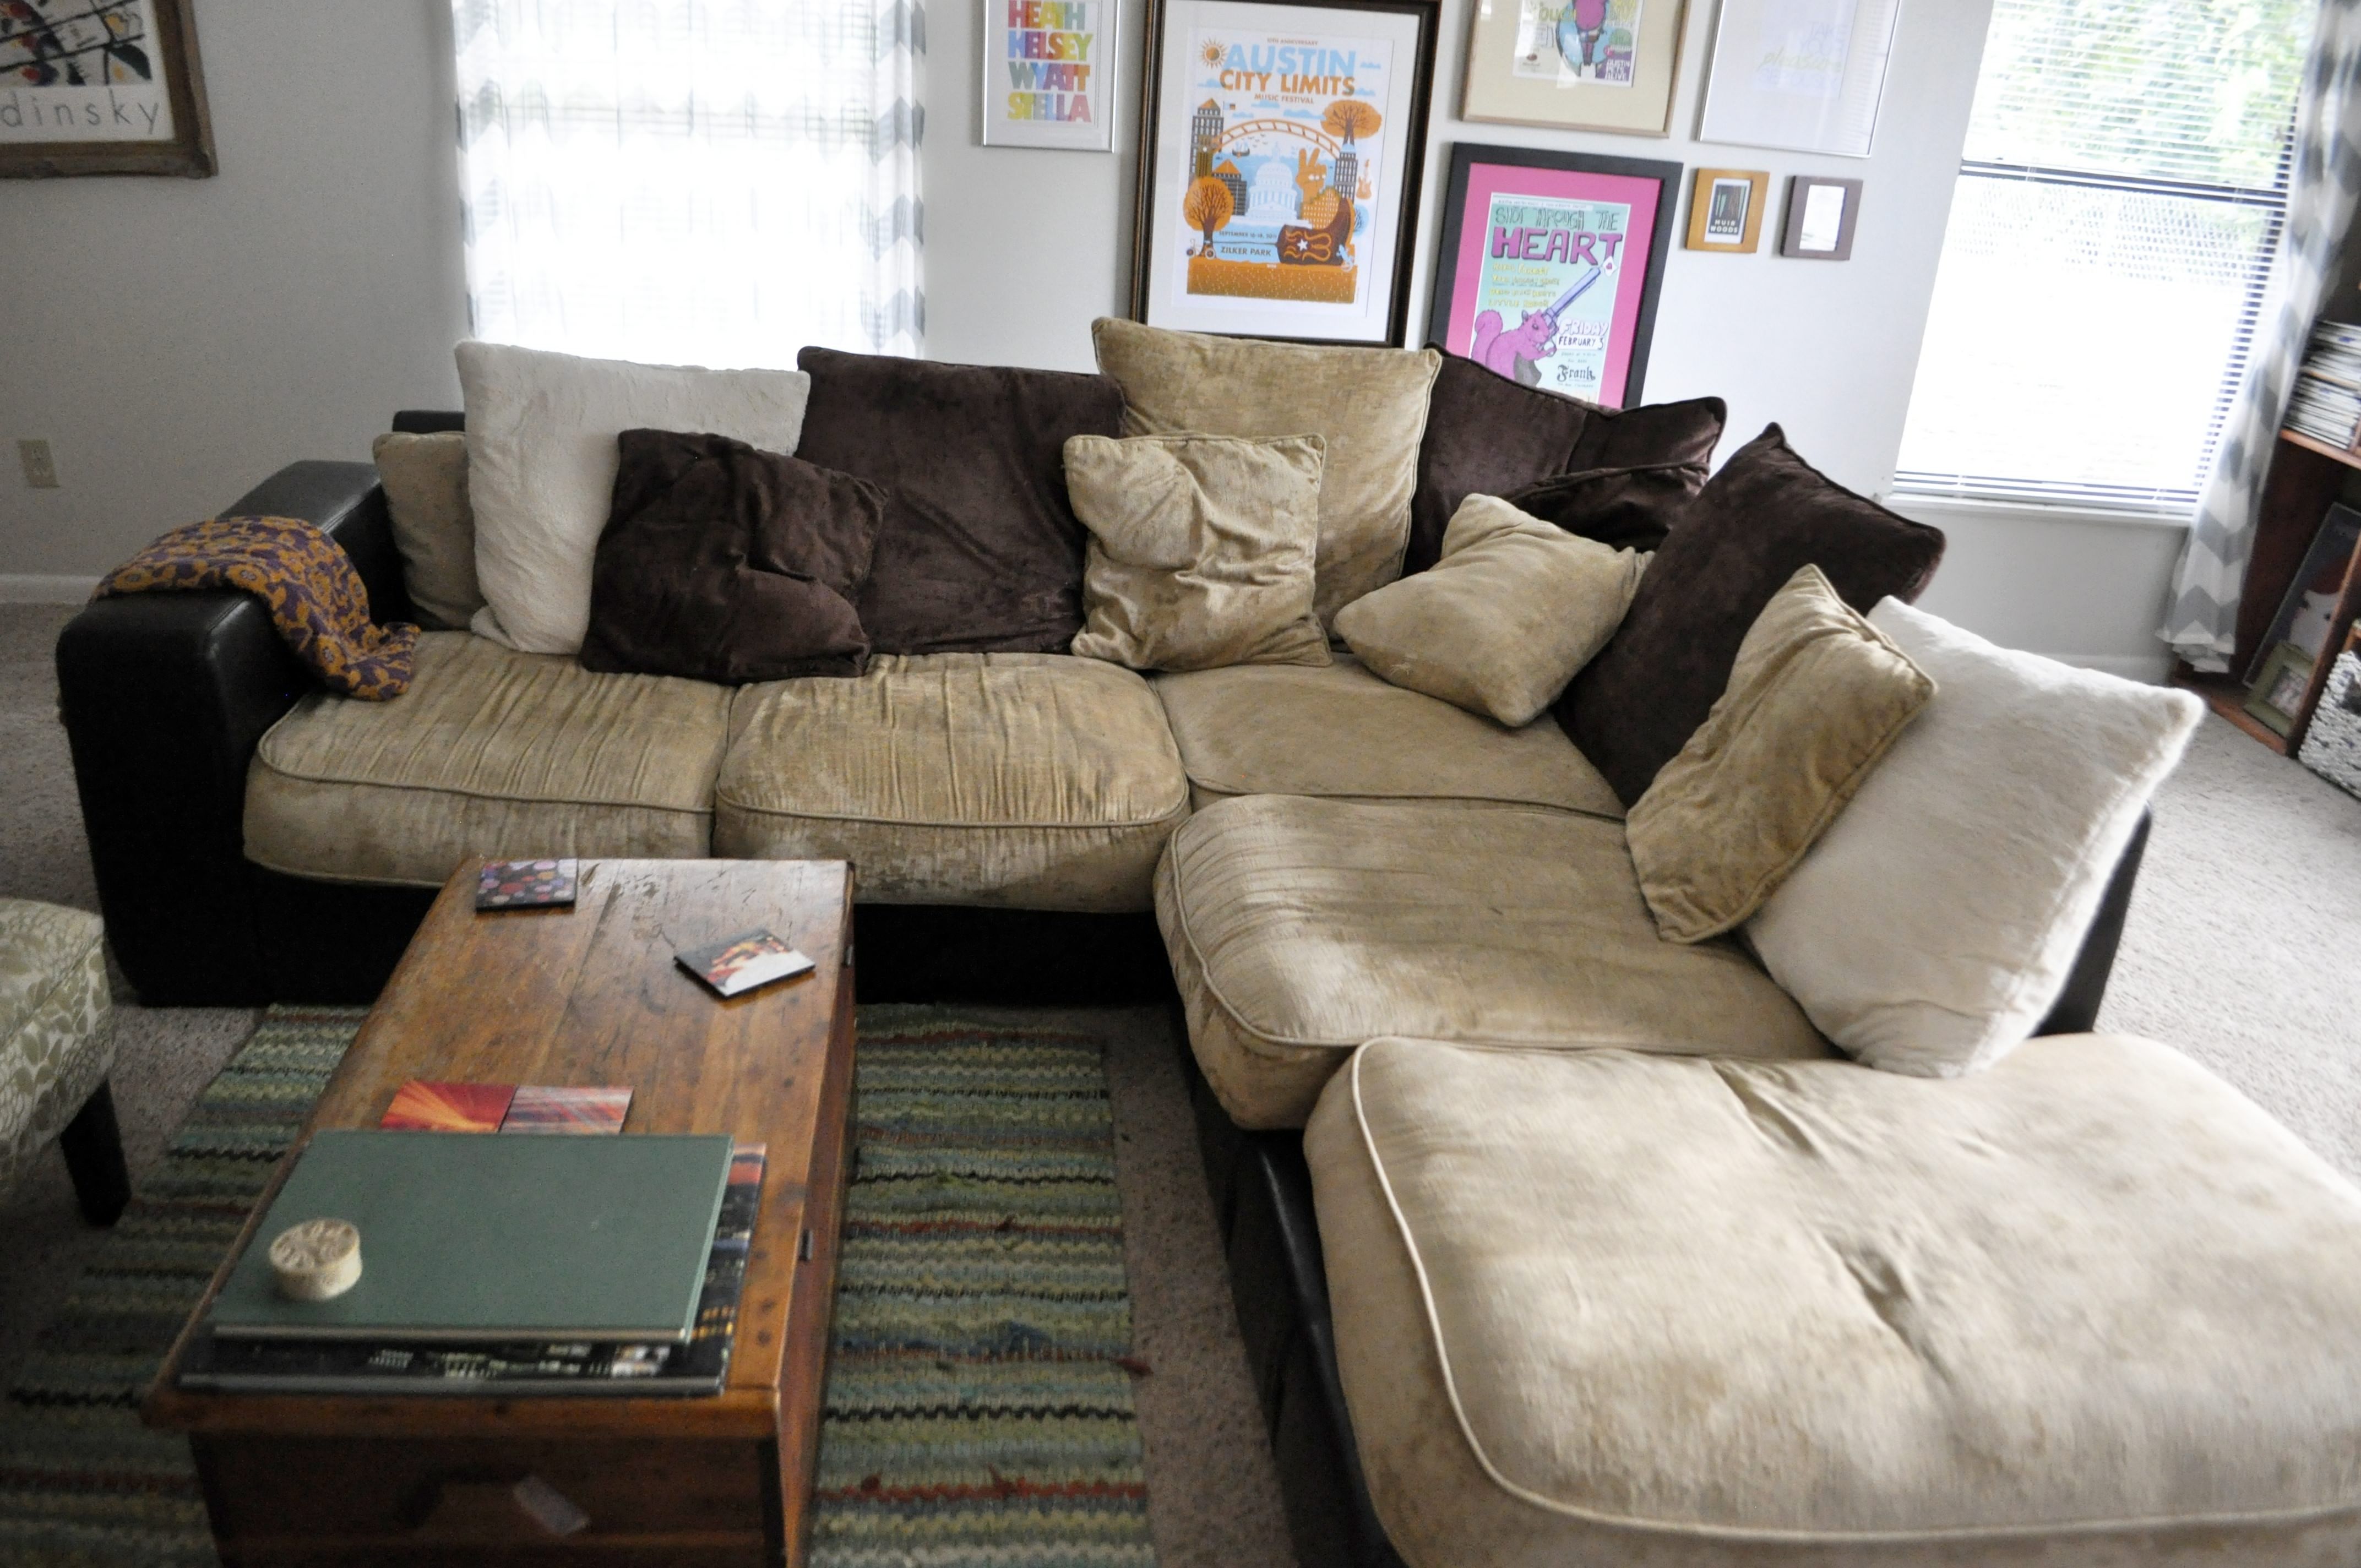 Picture Of Comfortable Sectional Sofa On Home Remodel Ideas Jk22 Pertaining To Comfortable Sectional Sofa (View 5 of 15)